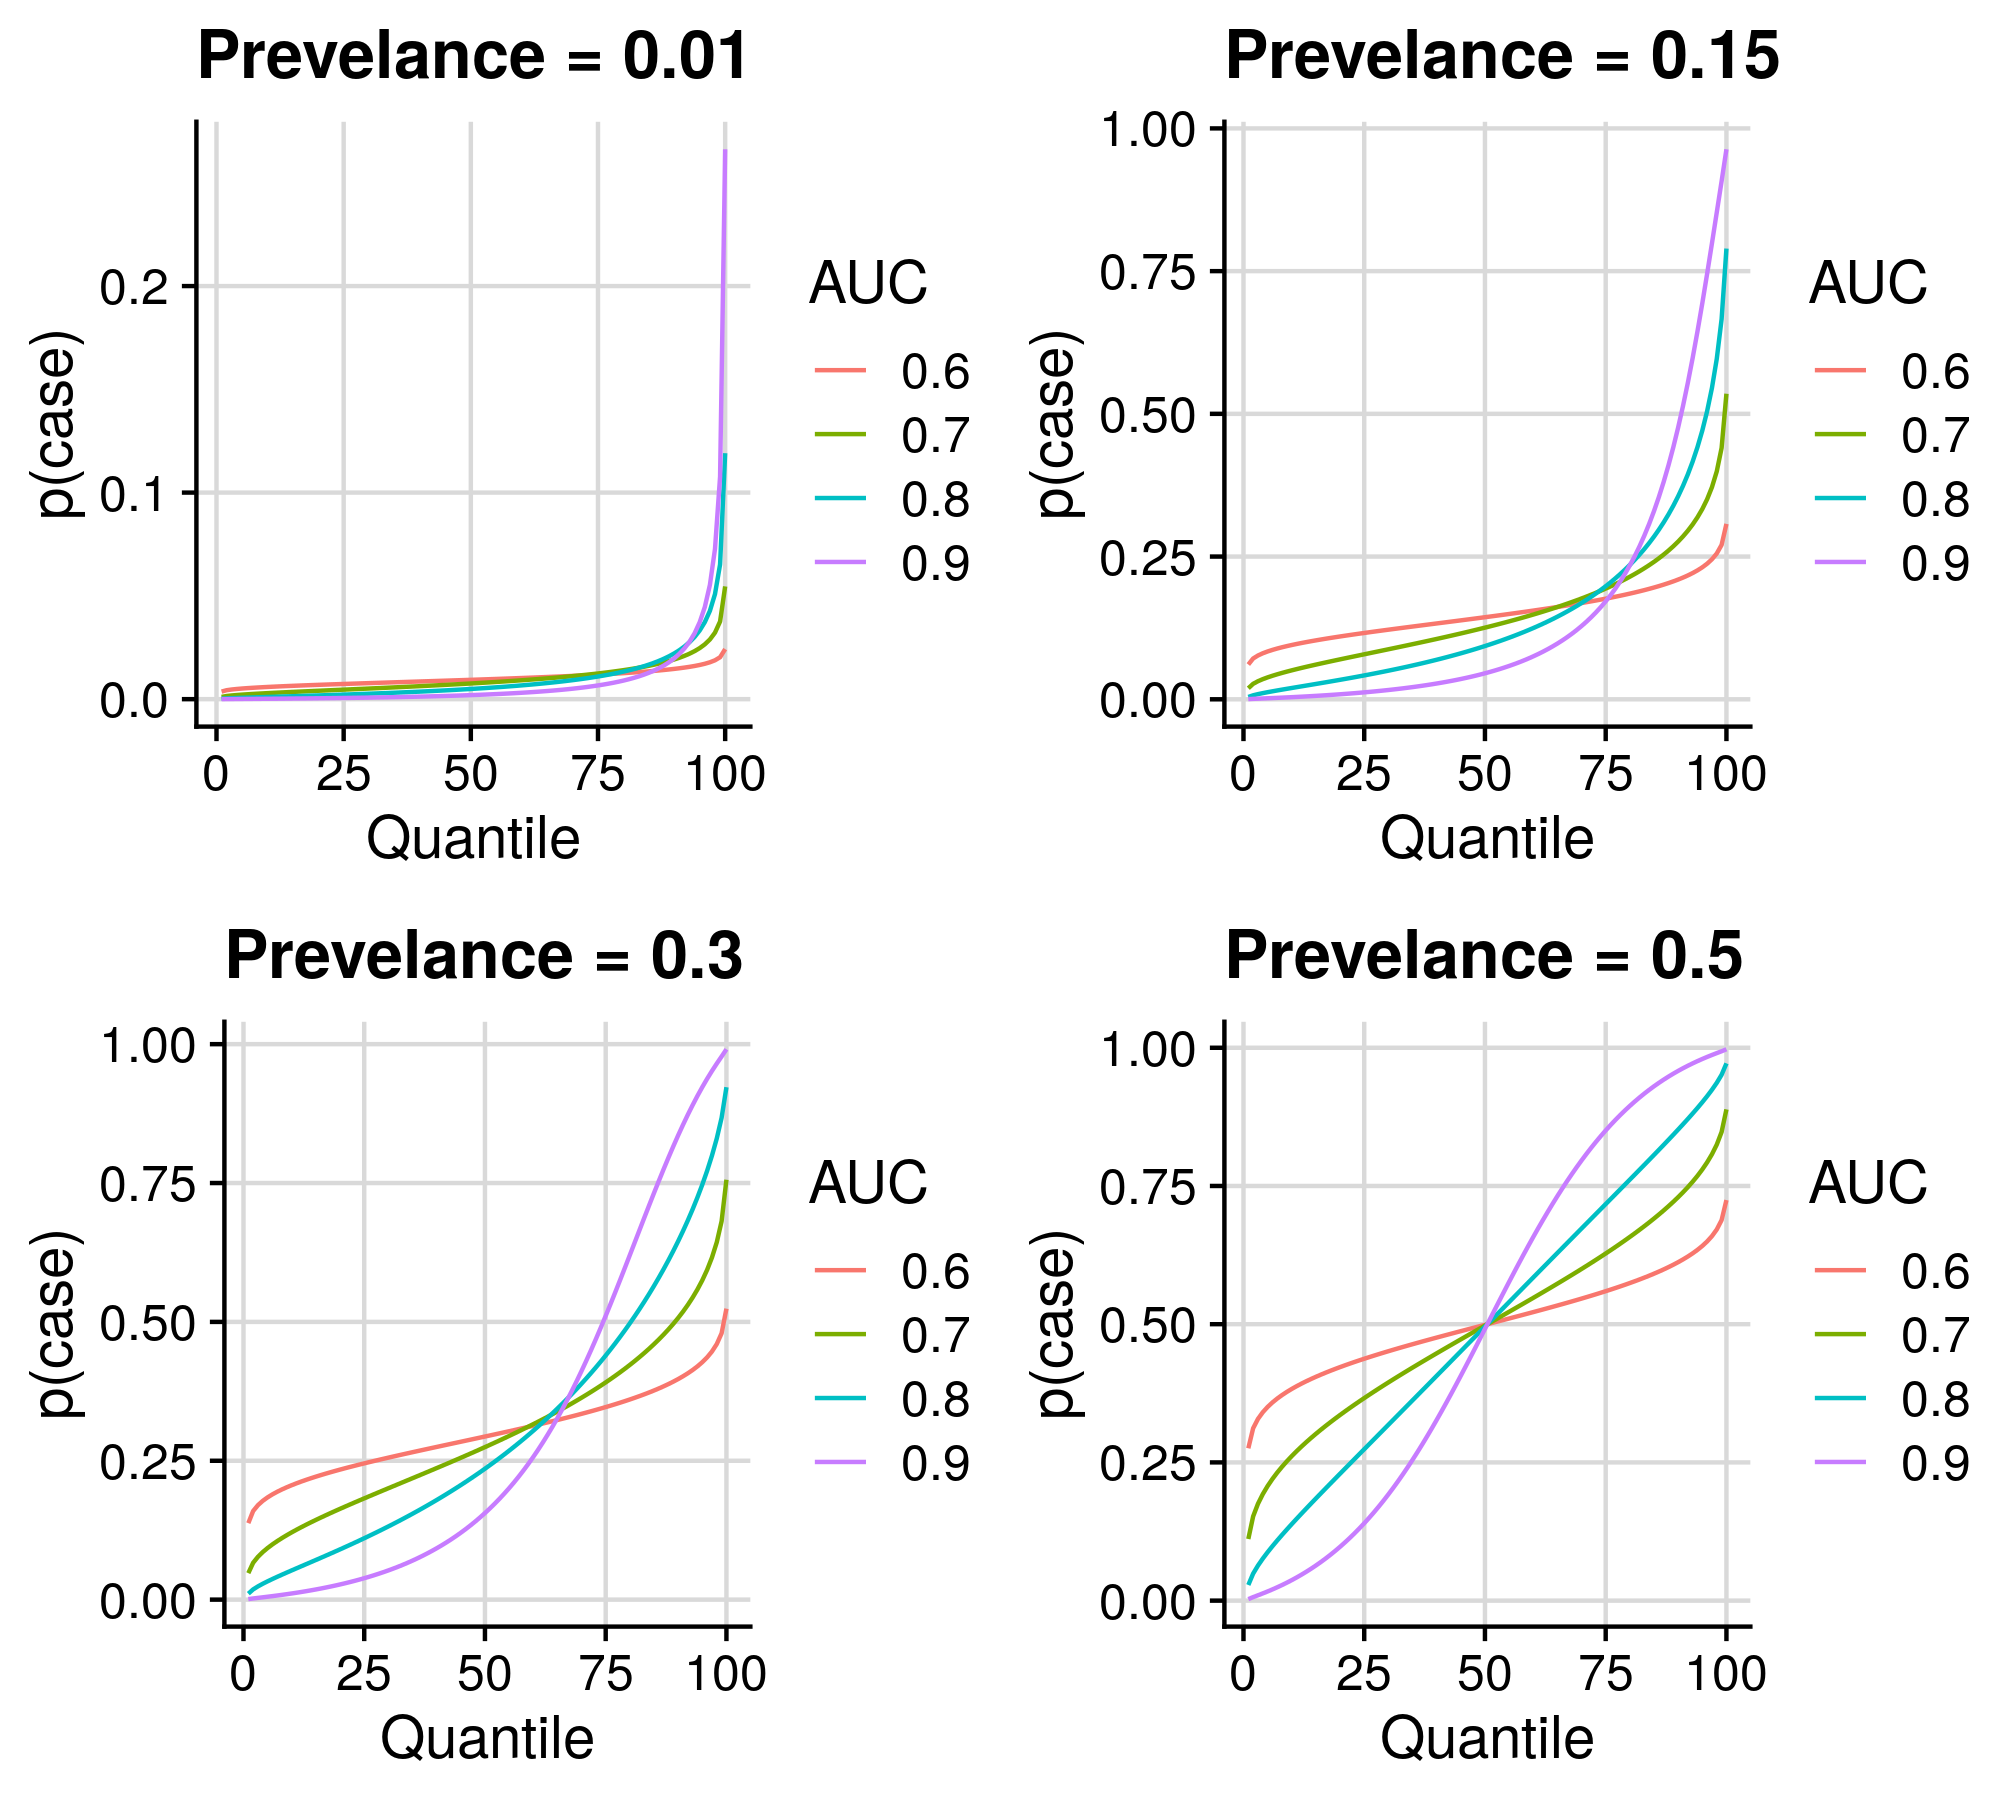 Proportion of Cases within Polygenic Score Quantiles across AUC and prevelance